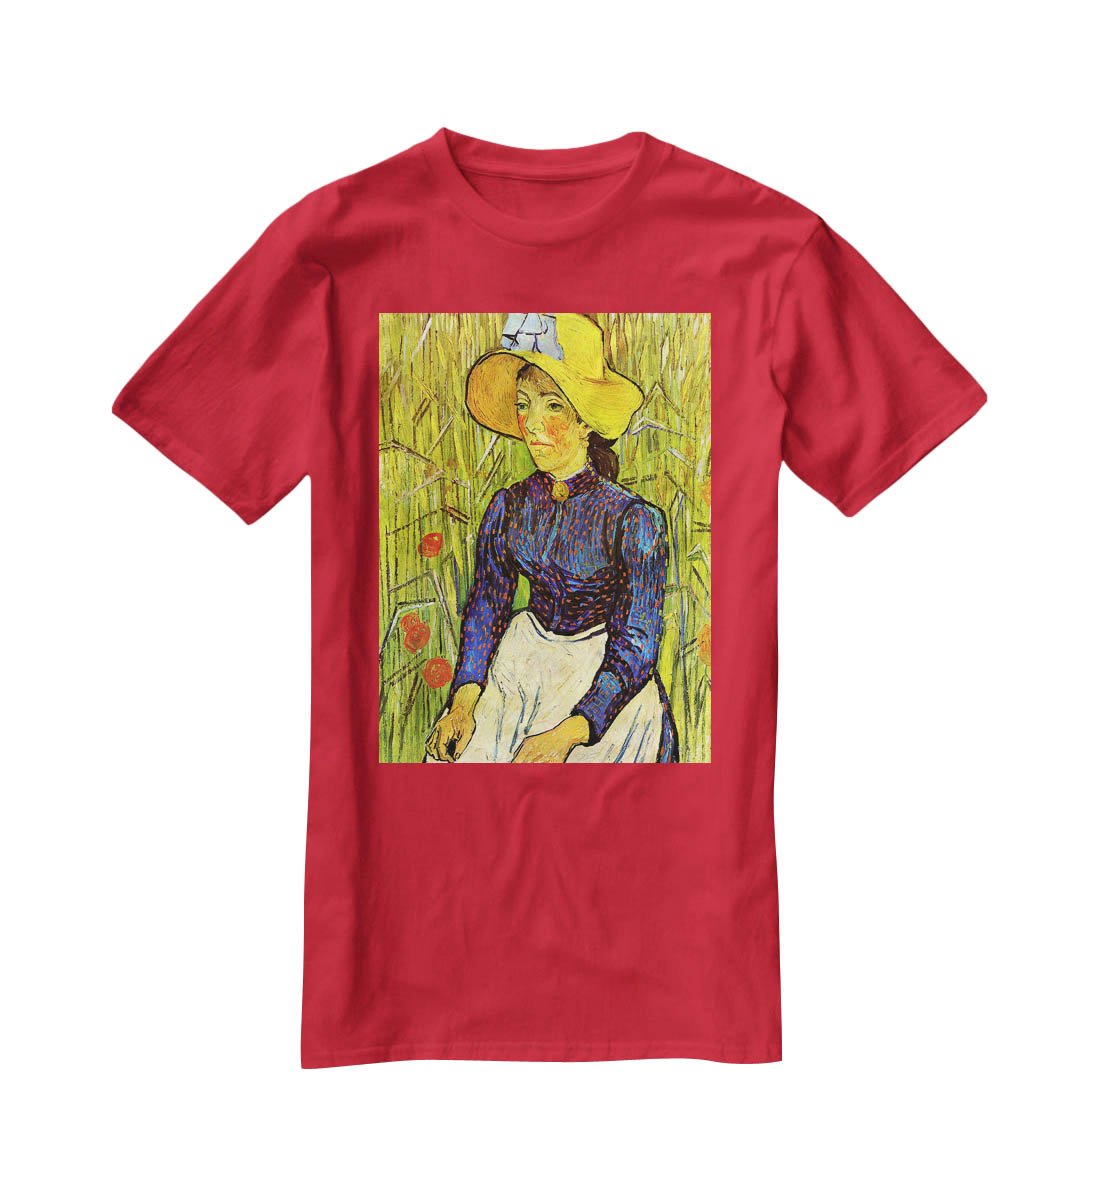 Young Peasant Woman with Straw Hat Sitting in the Wheat by Van Gogh T-Shirt - Canvas Art Rocks - 4